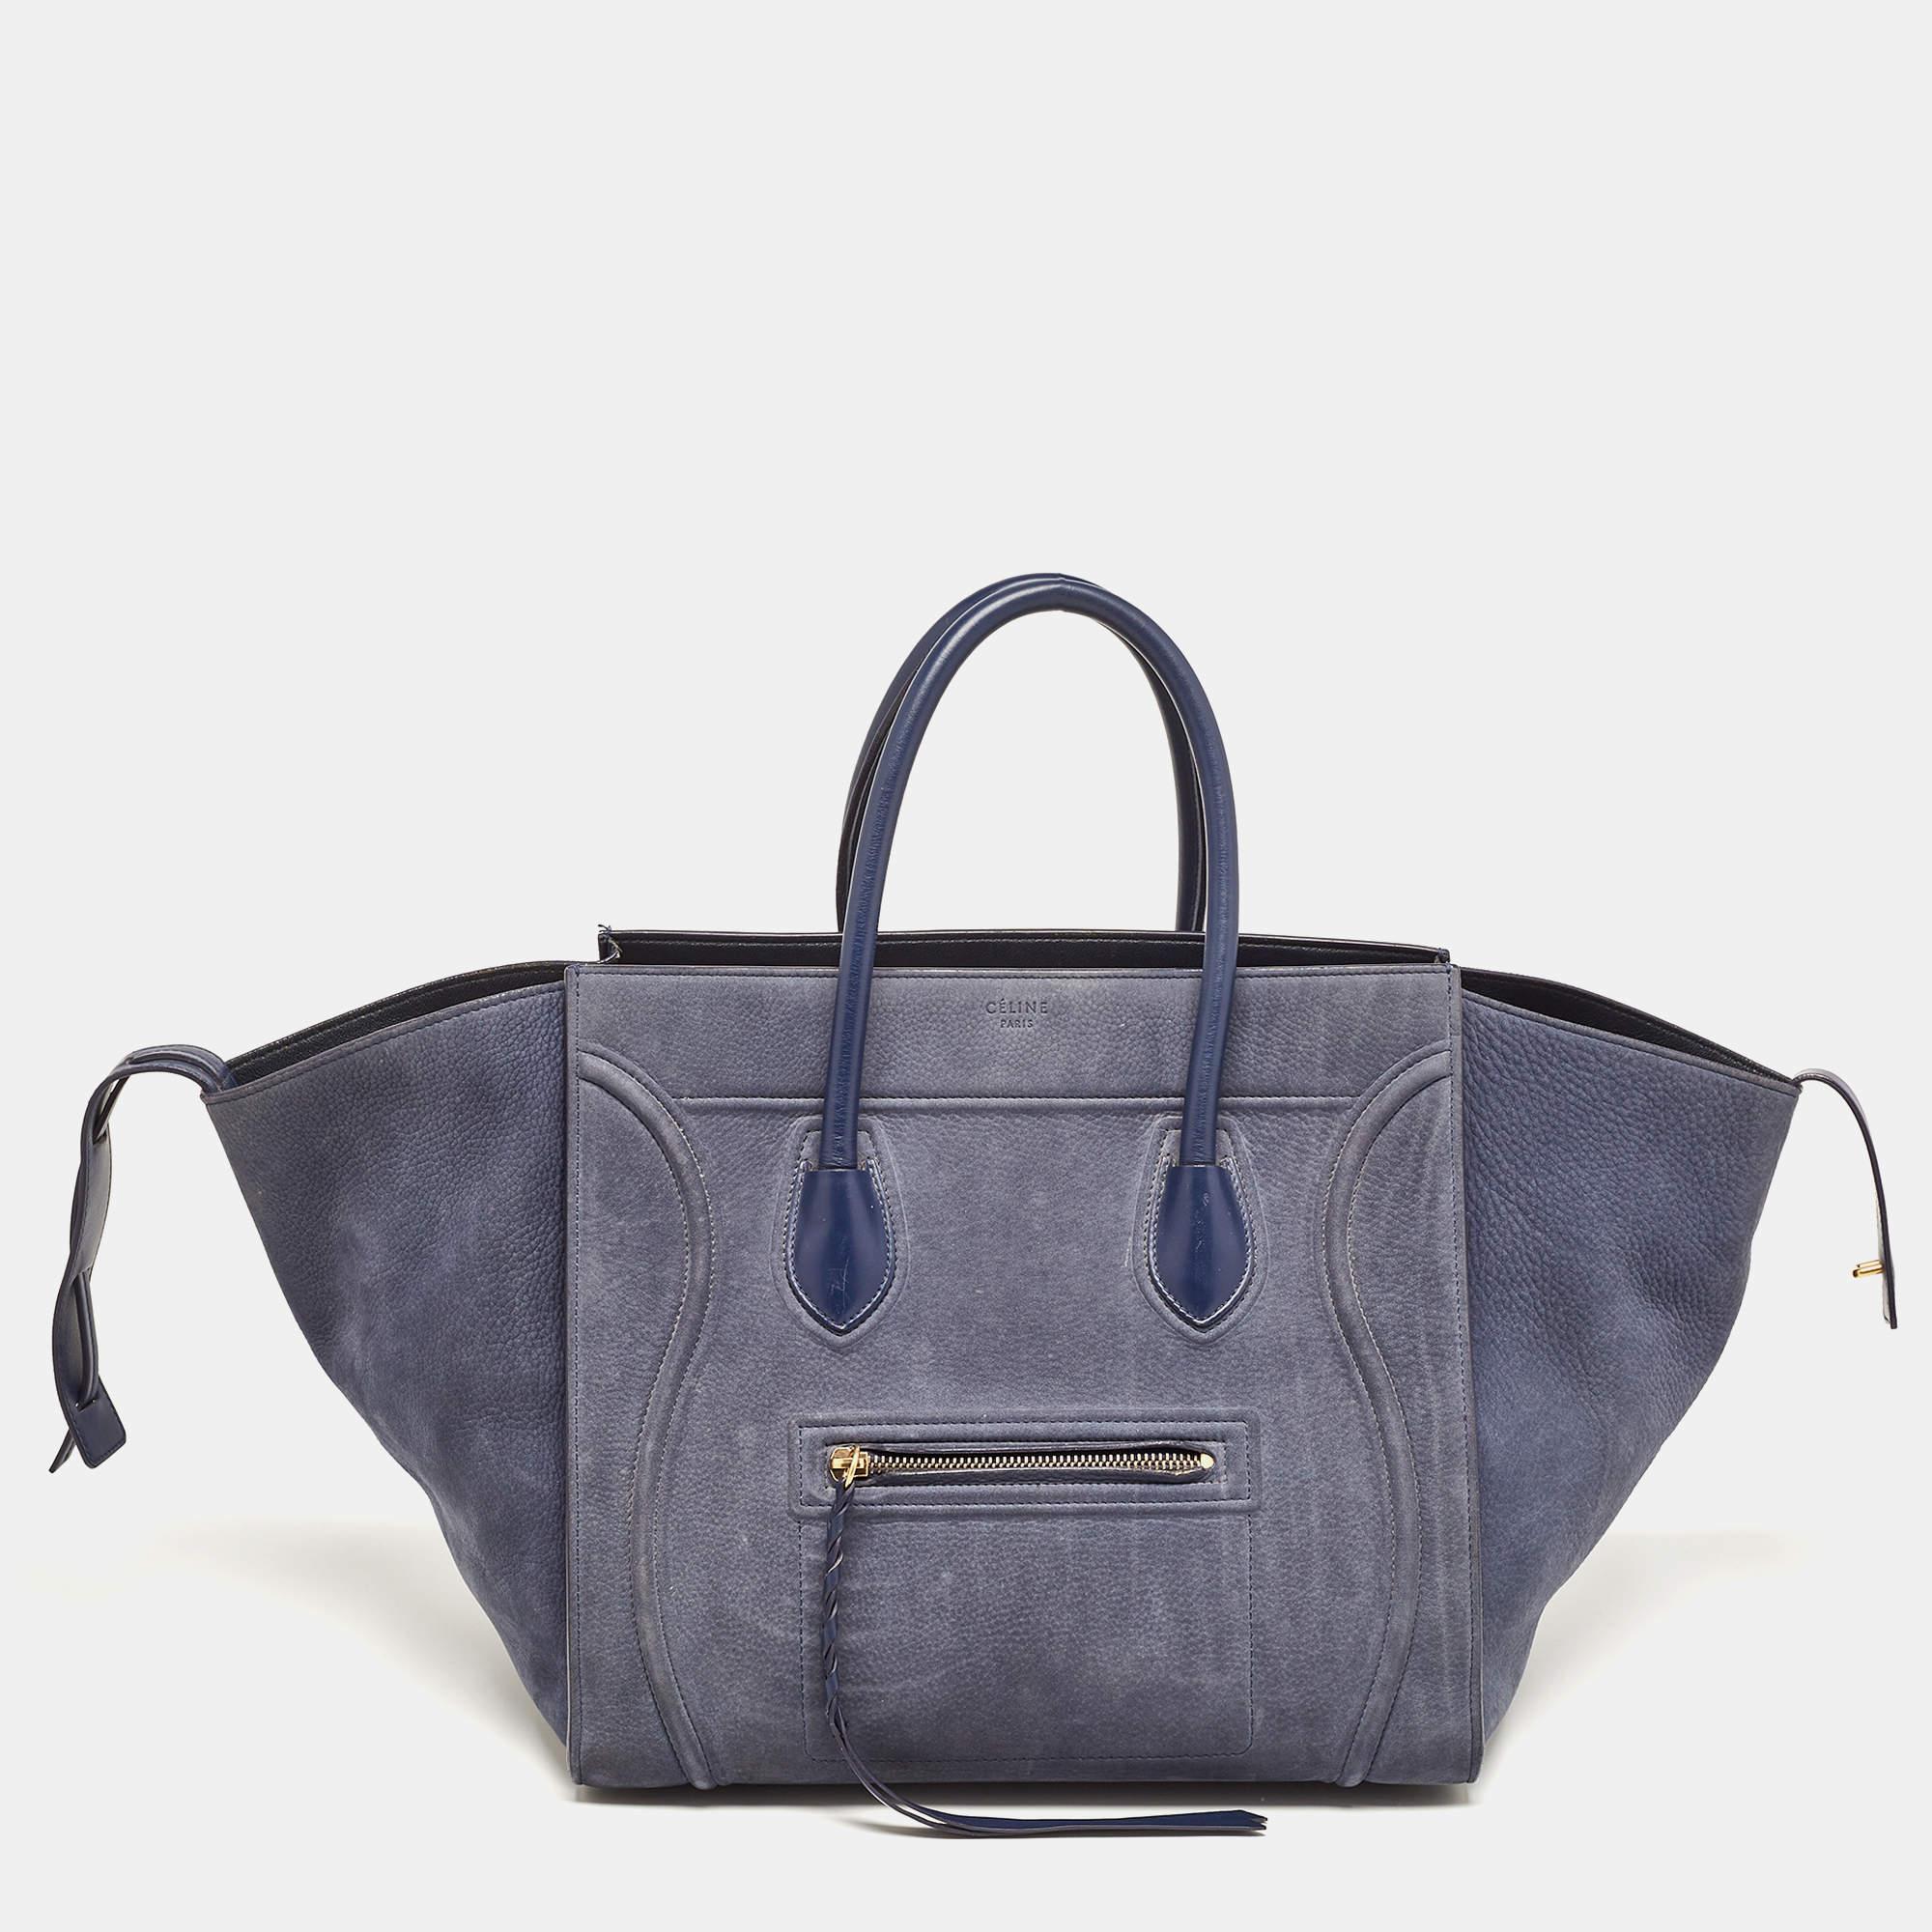 The phantom by Celine is a modernized update of the luggage bag by the brand. This tote has been constructed from nubuck leather and the design is highlighted with a wide wingspan, front zipper pocket, and brand detailing on the front. The dual